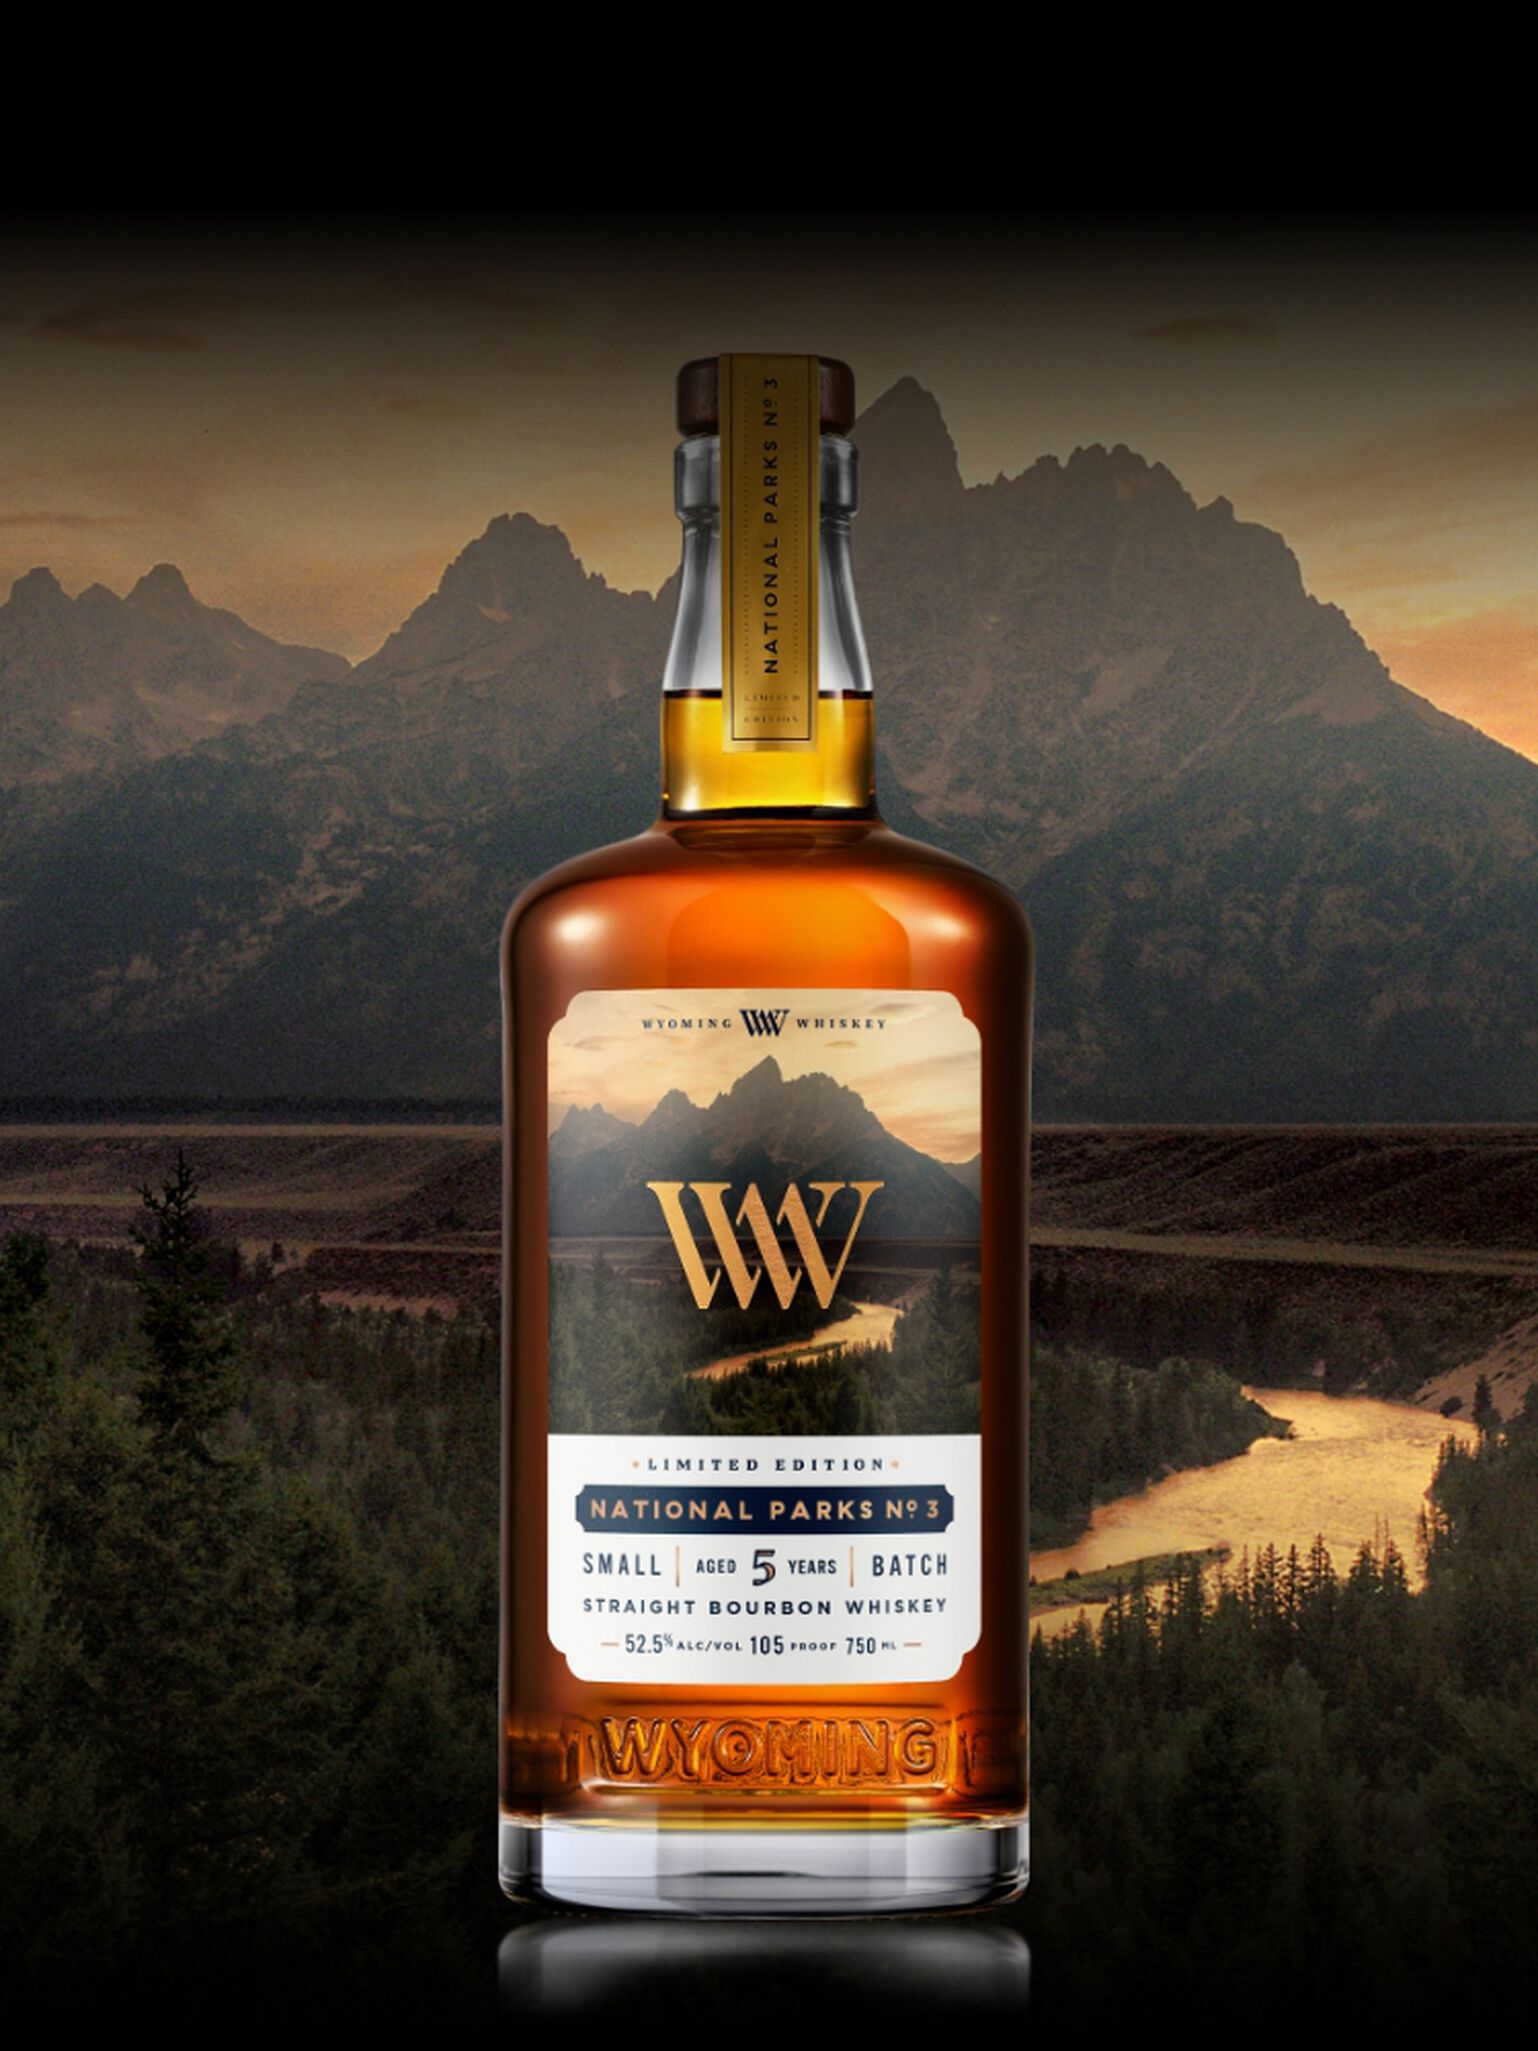 Bottle of Wyoming Whiskey National Parks No. 3